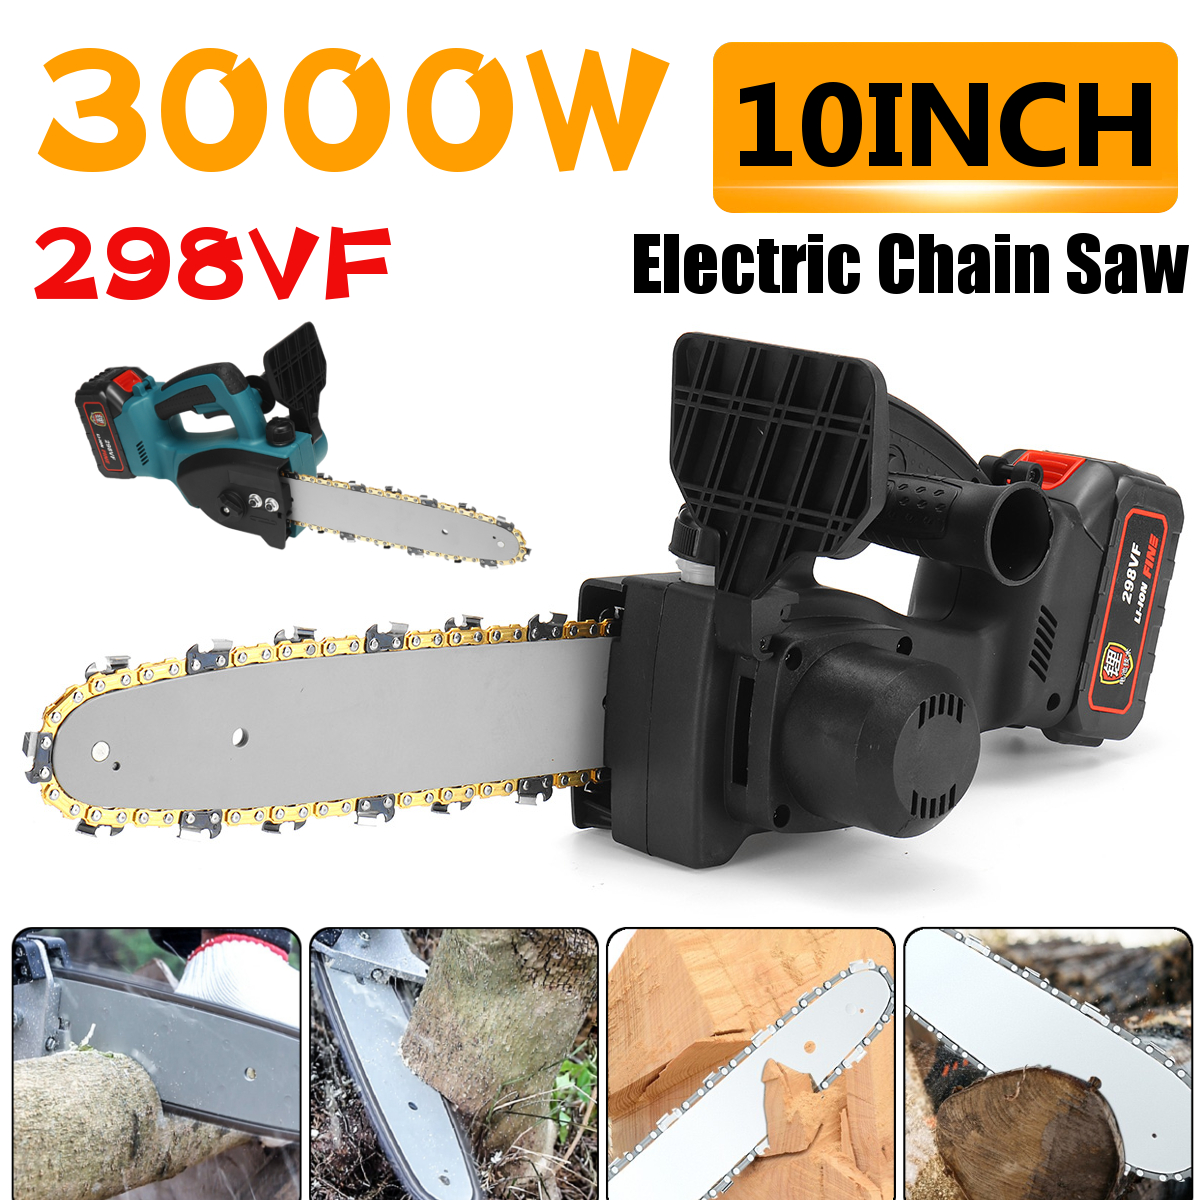 10inch-298VF-Cordless-Electric-Chain-Saw-Handheld-Chainsaw-Wood-Tree-Cutter-W-12pcs-Battery-1833237-2